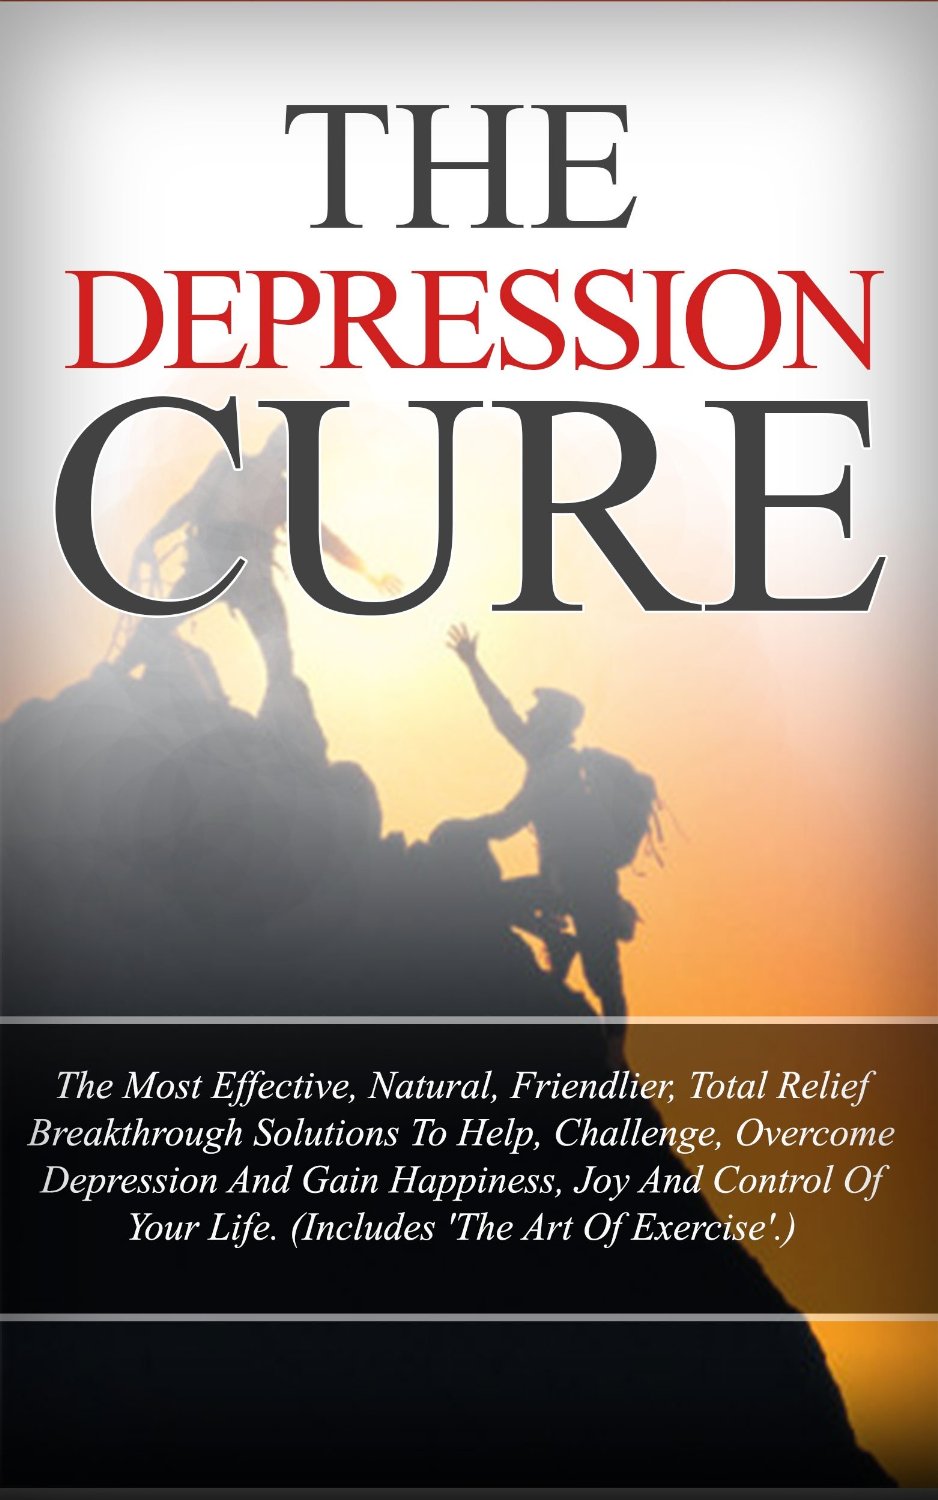 The Depression Cure – The Most Effective, Natural, Friendlier, Total Relief Breakthrough Solutions To Help, Challenge, Overcome Depression And Gain Happiness, Joy And Control Of Your Life. by J Michael J